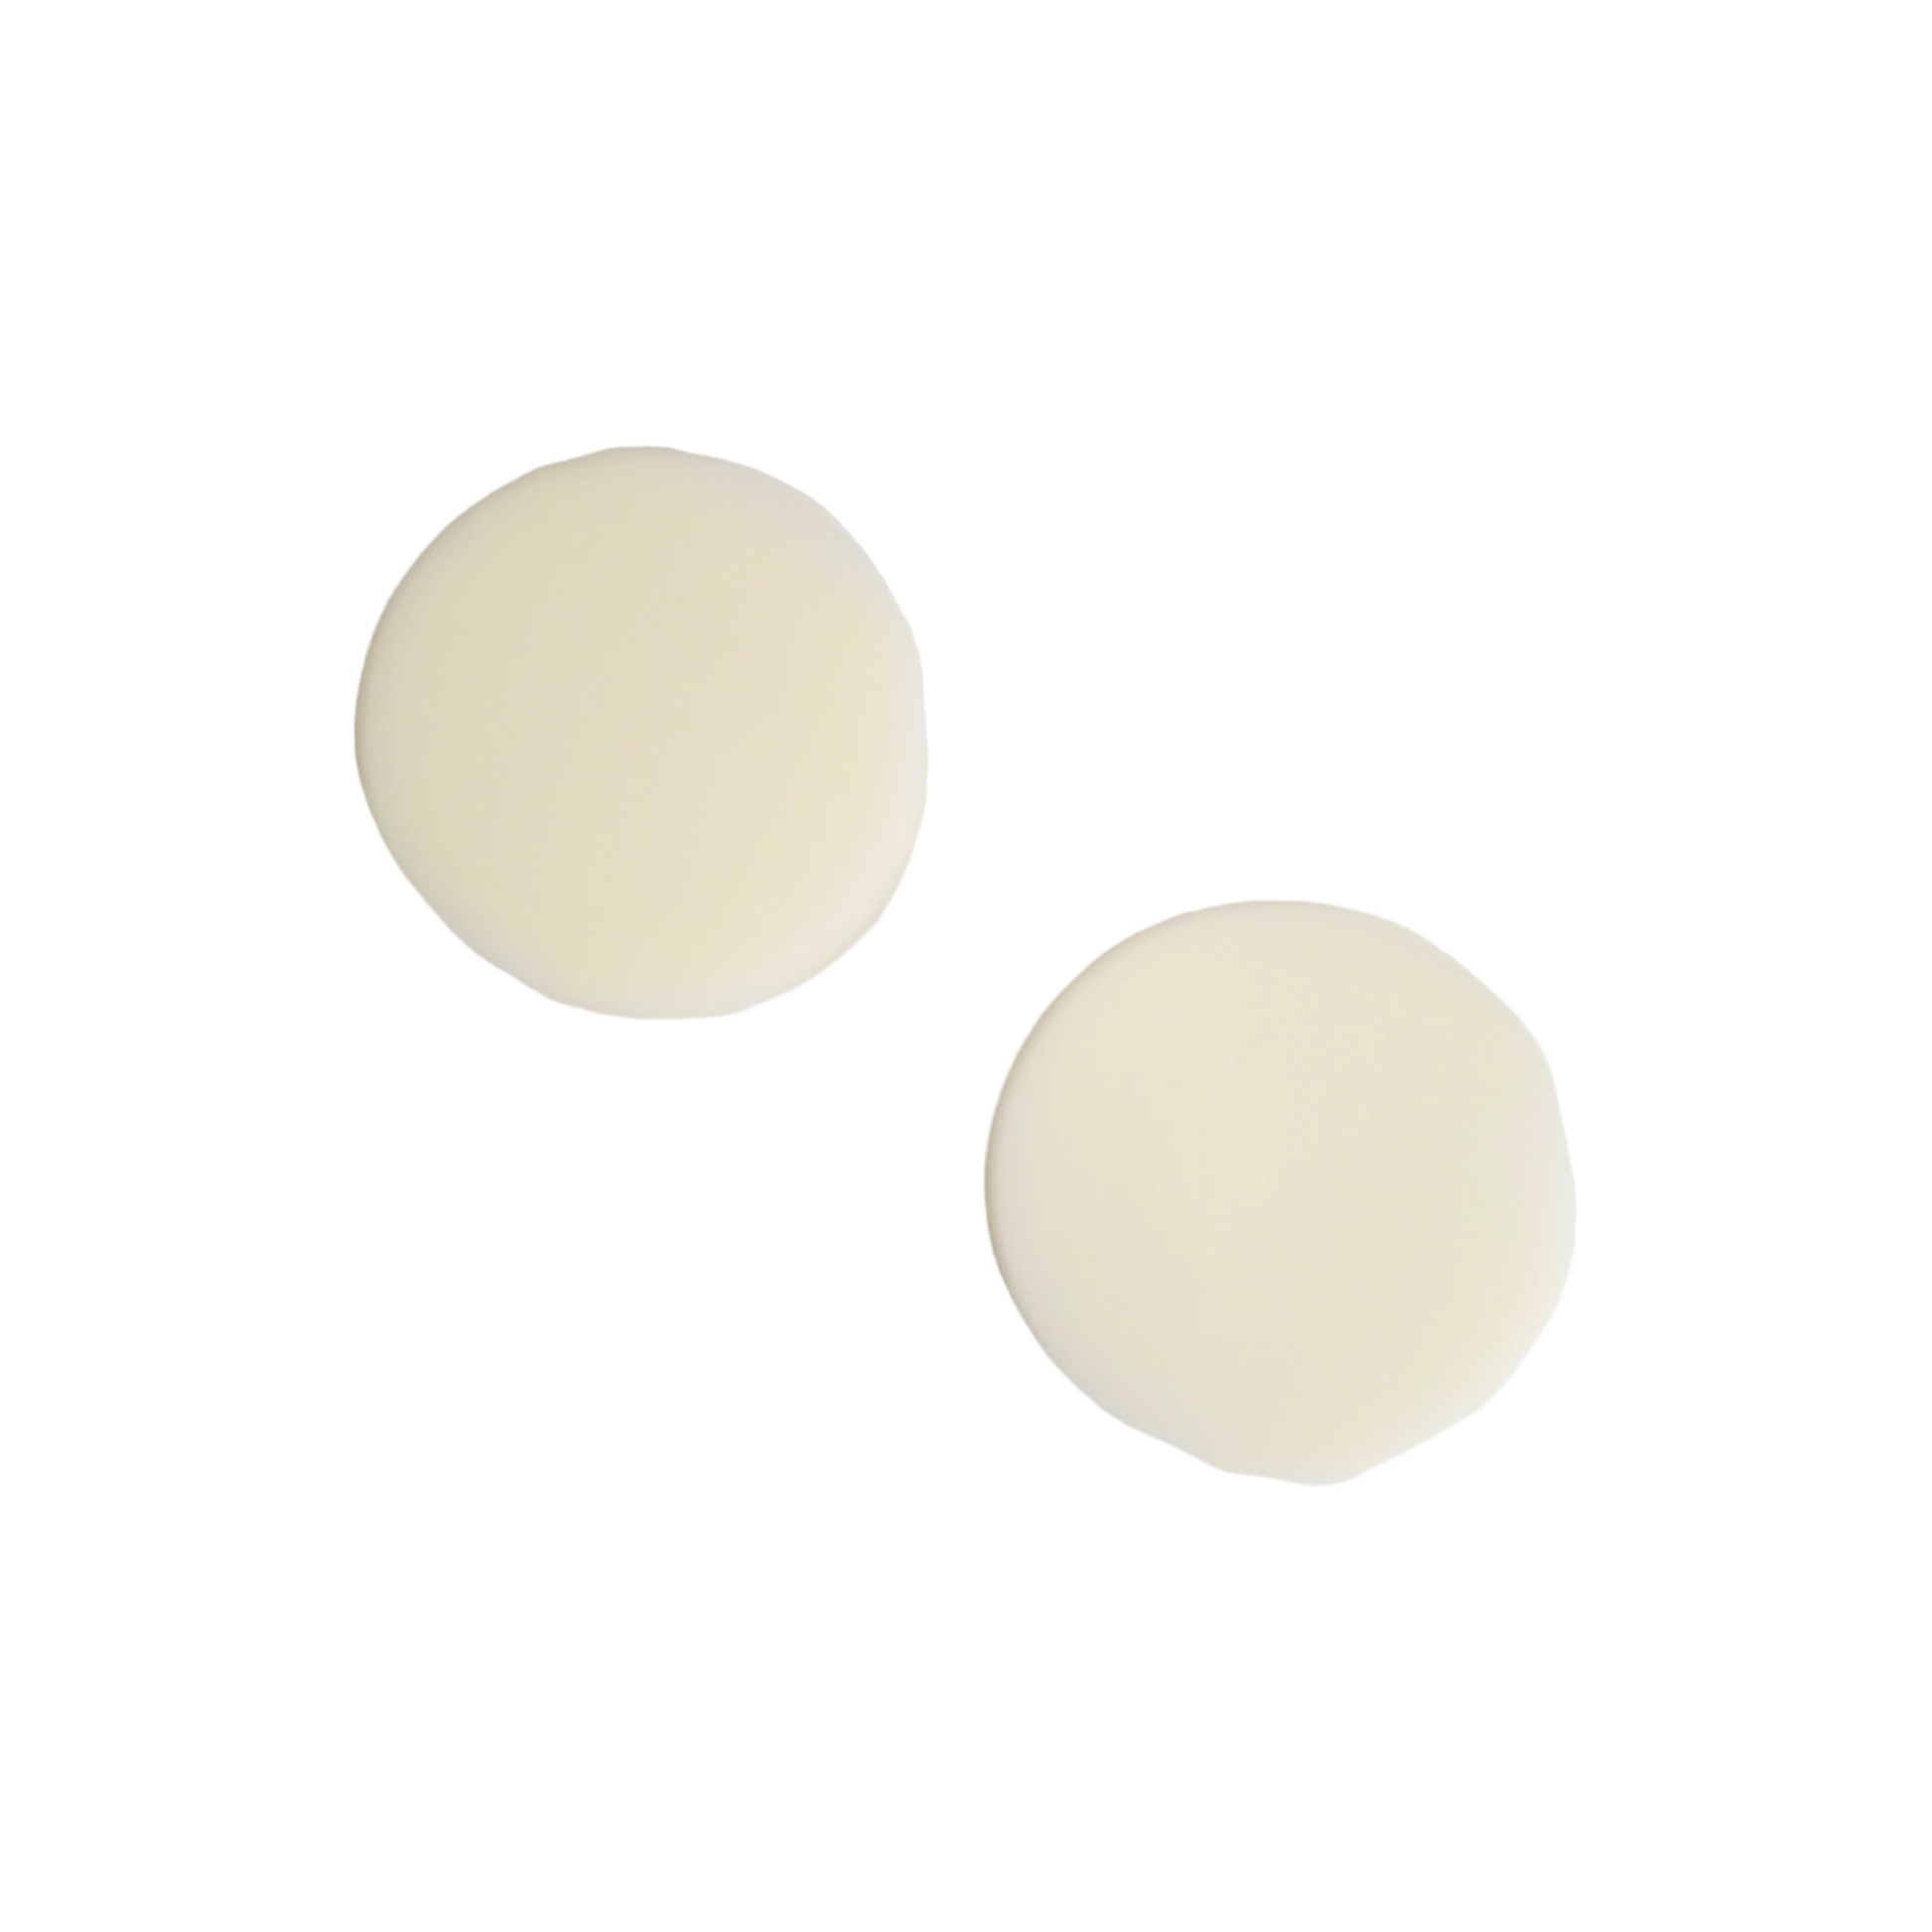 Two white soy wax melt rounds 